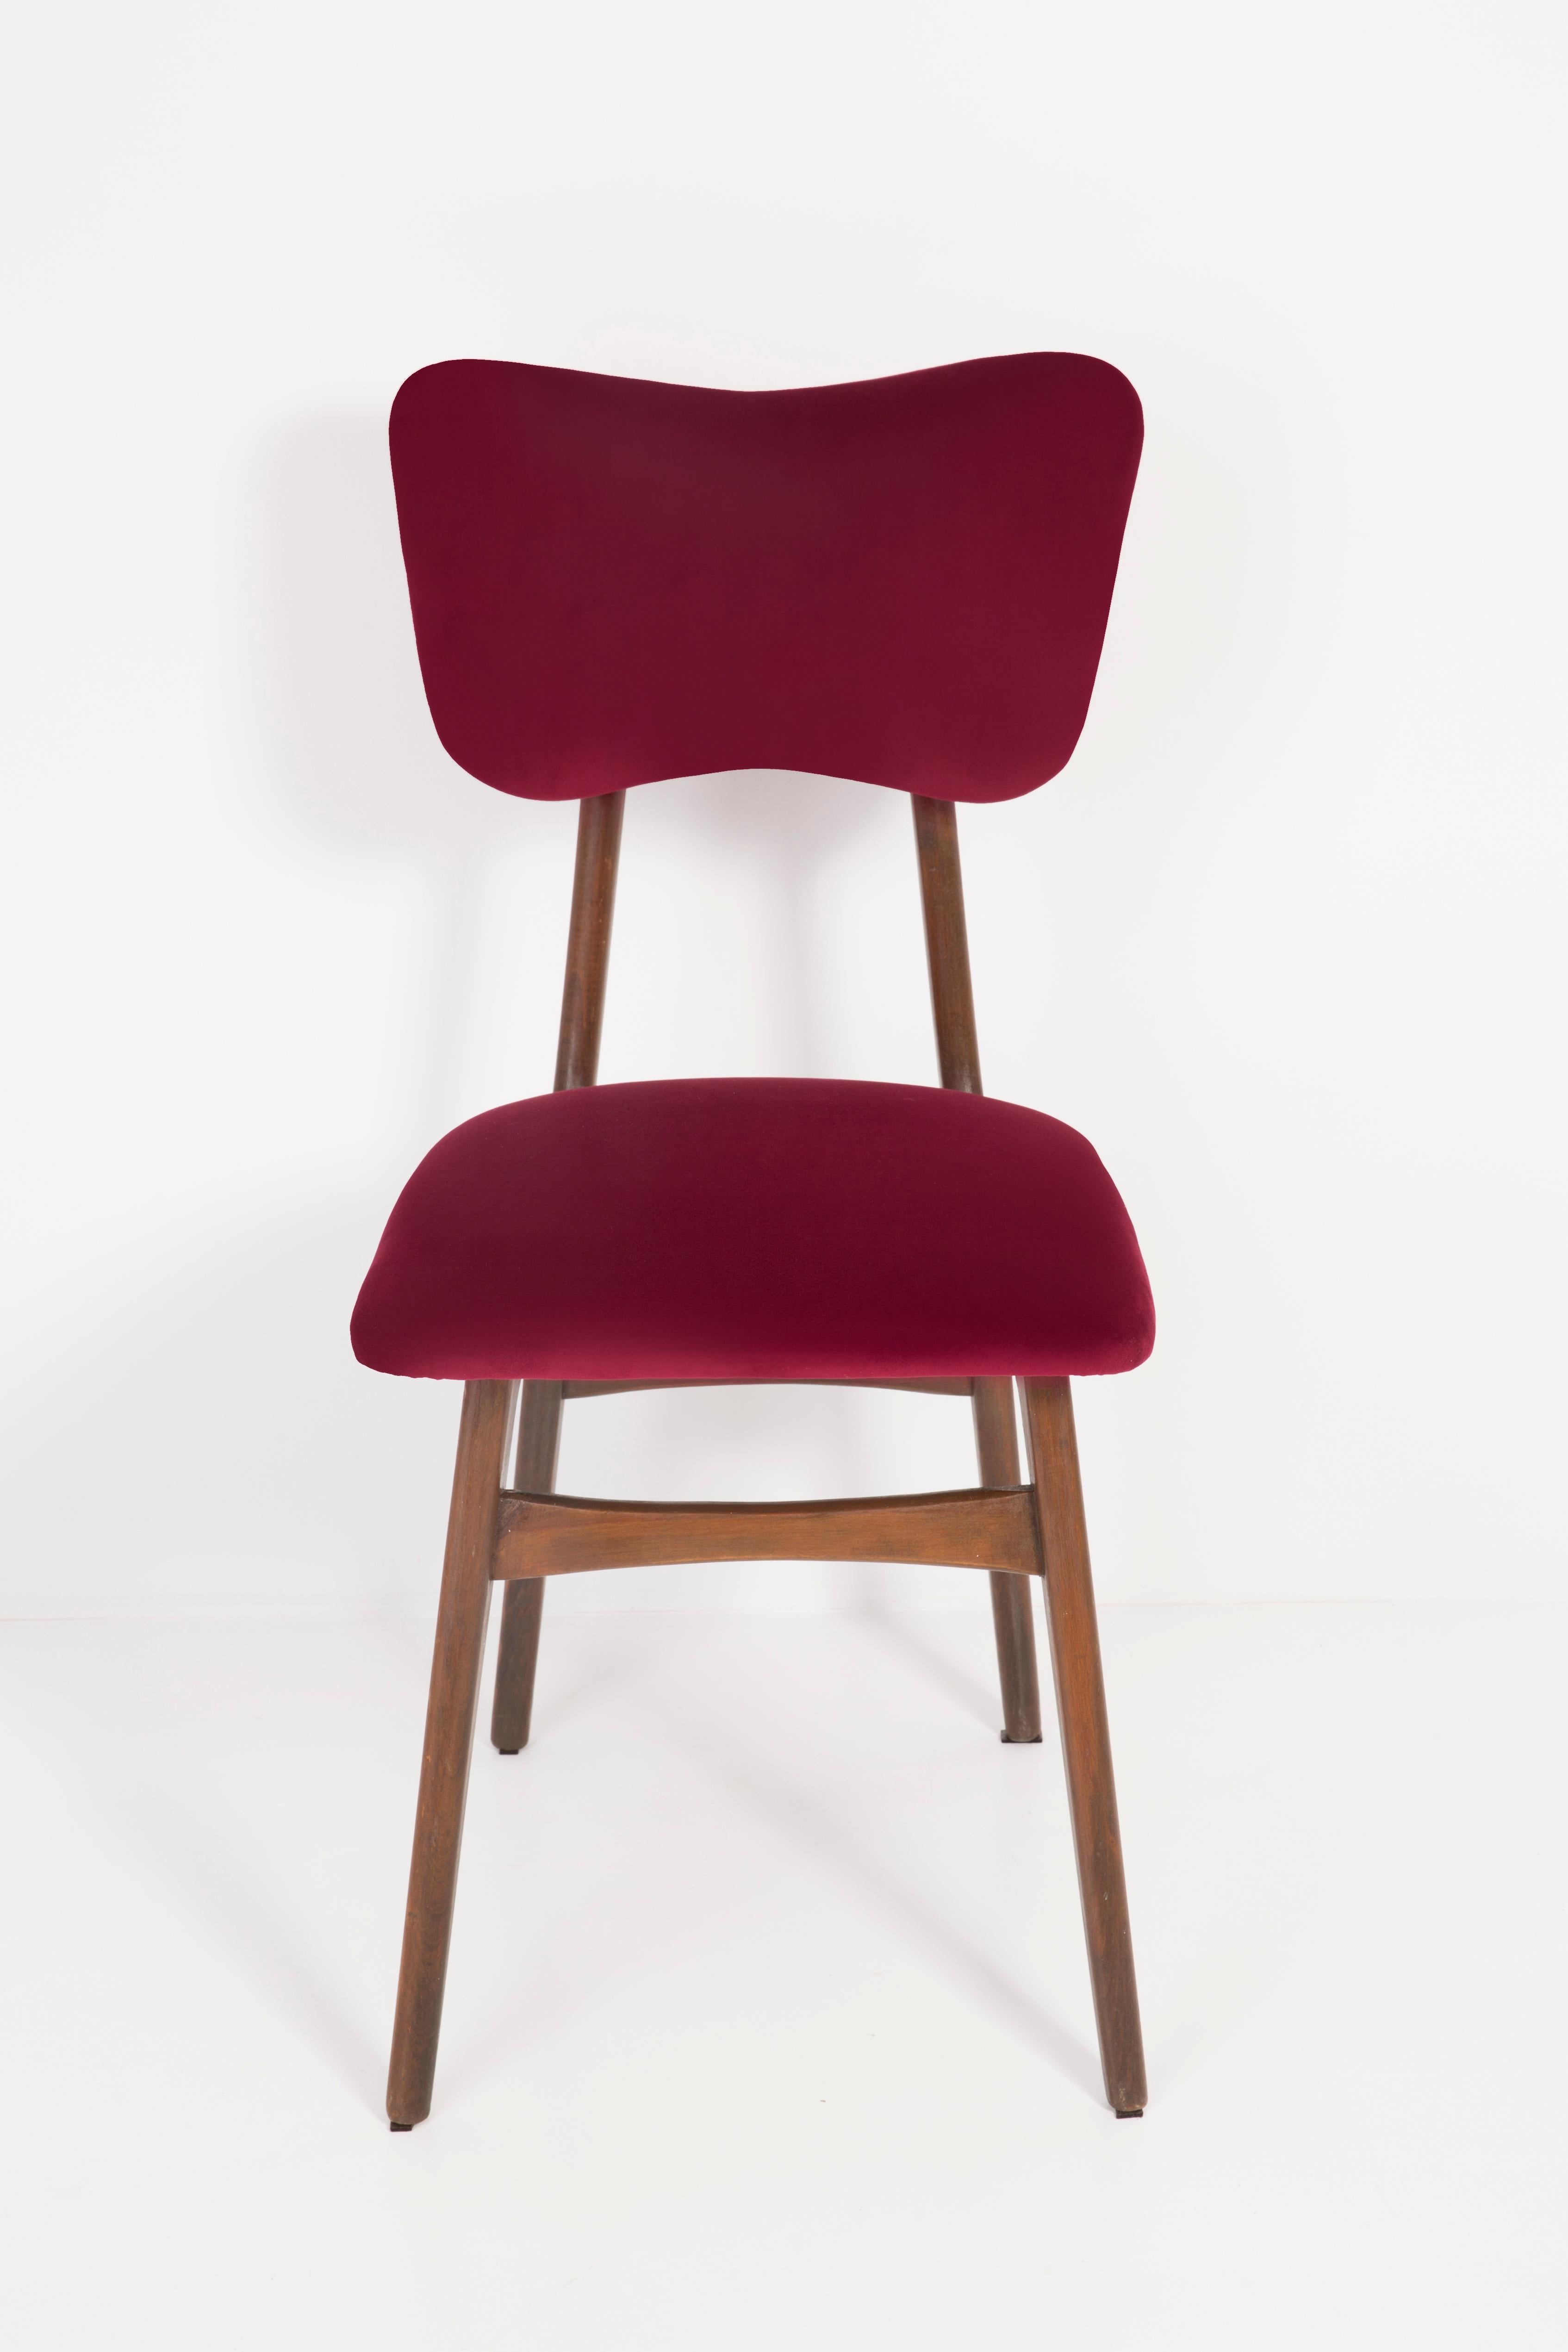 Mid-Century Modern 20th Century Burgundy Red Chair, 1960s For Sale